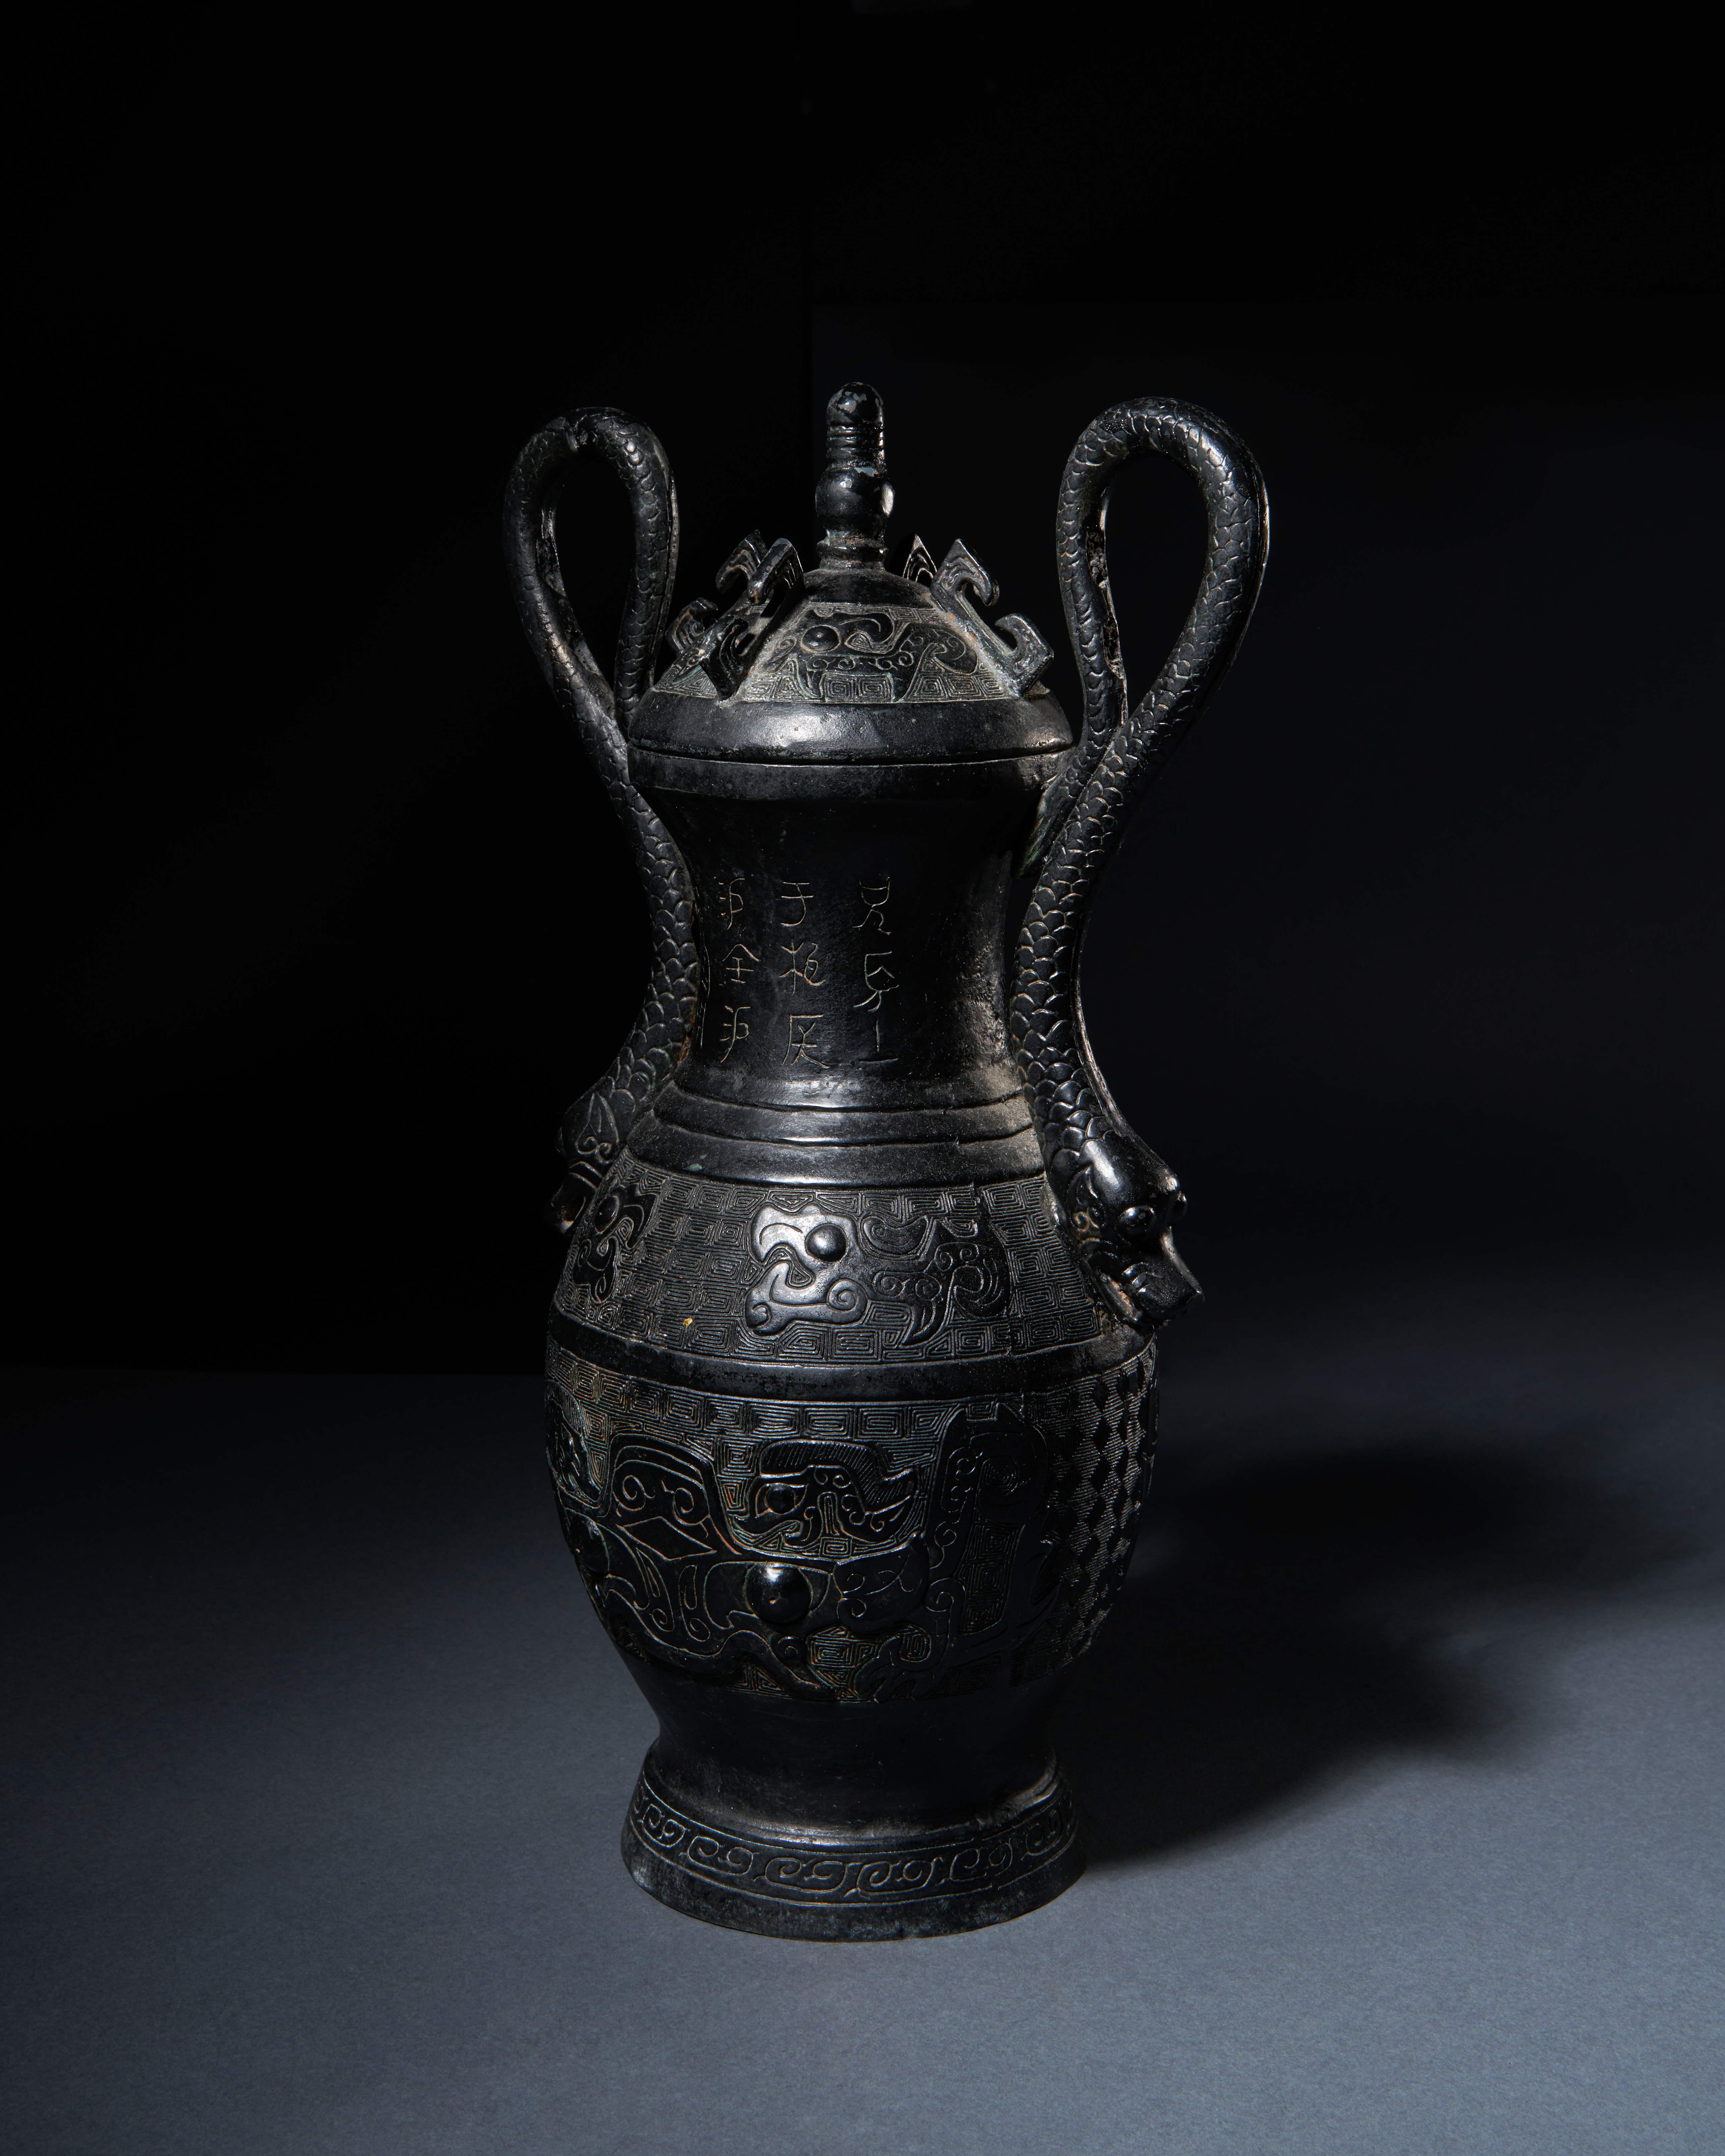 A CHINESE ARCHAISTIC BRONZE VASE, QING DYNASTY (1644-1911) - Image 2 of 5